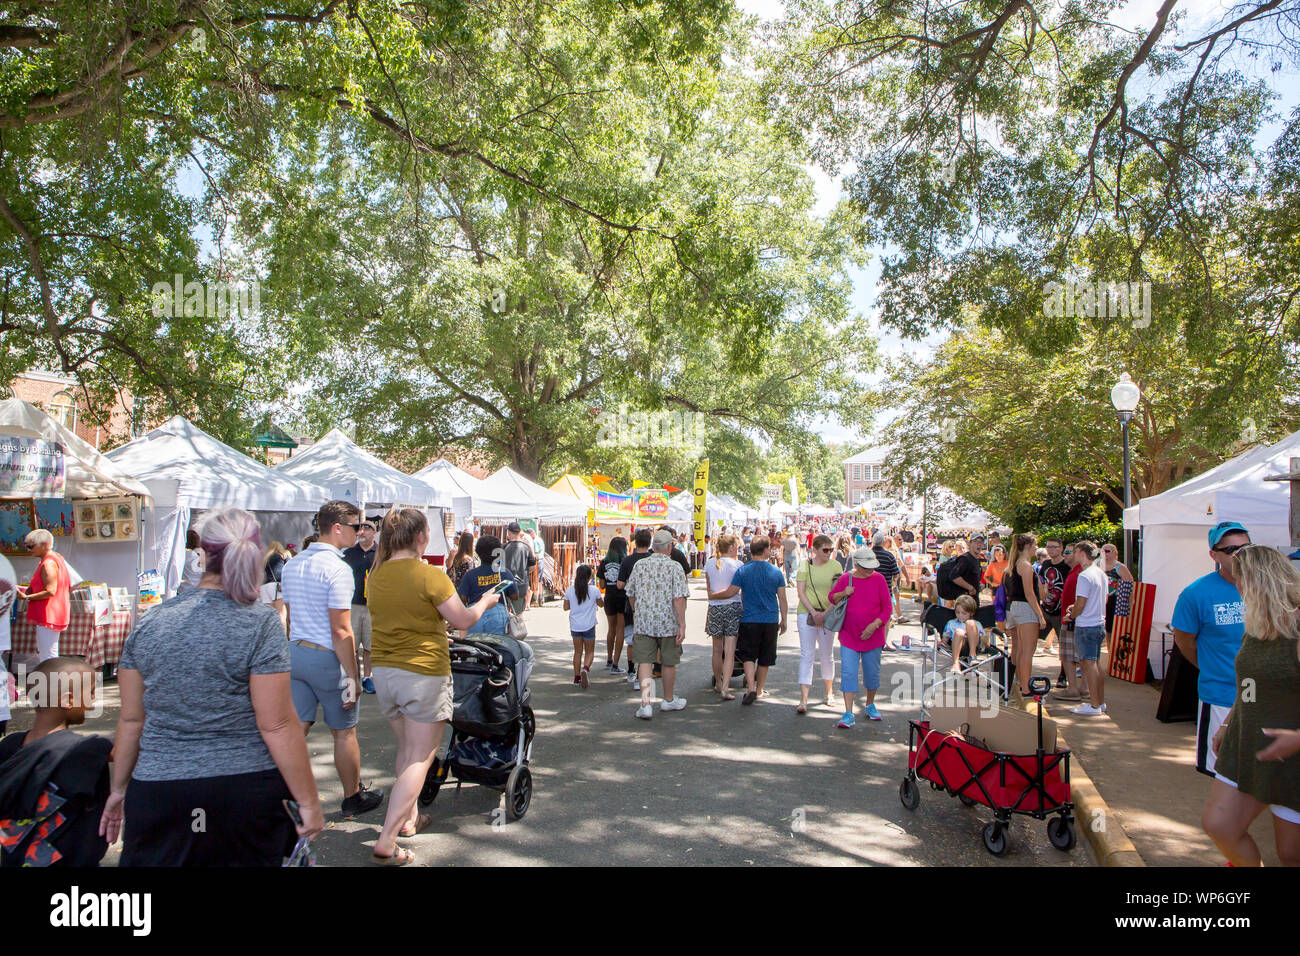 MATTHEWS, NC (USA) - September 2, 2019: Visitors to the annual 'Matthews Alive' community festival mob the area where arts and crafts are sold. Stock Photo